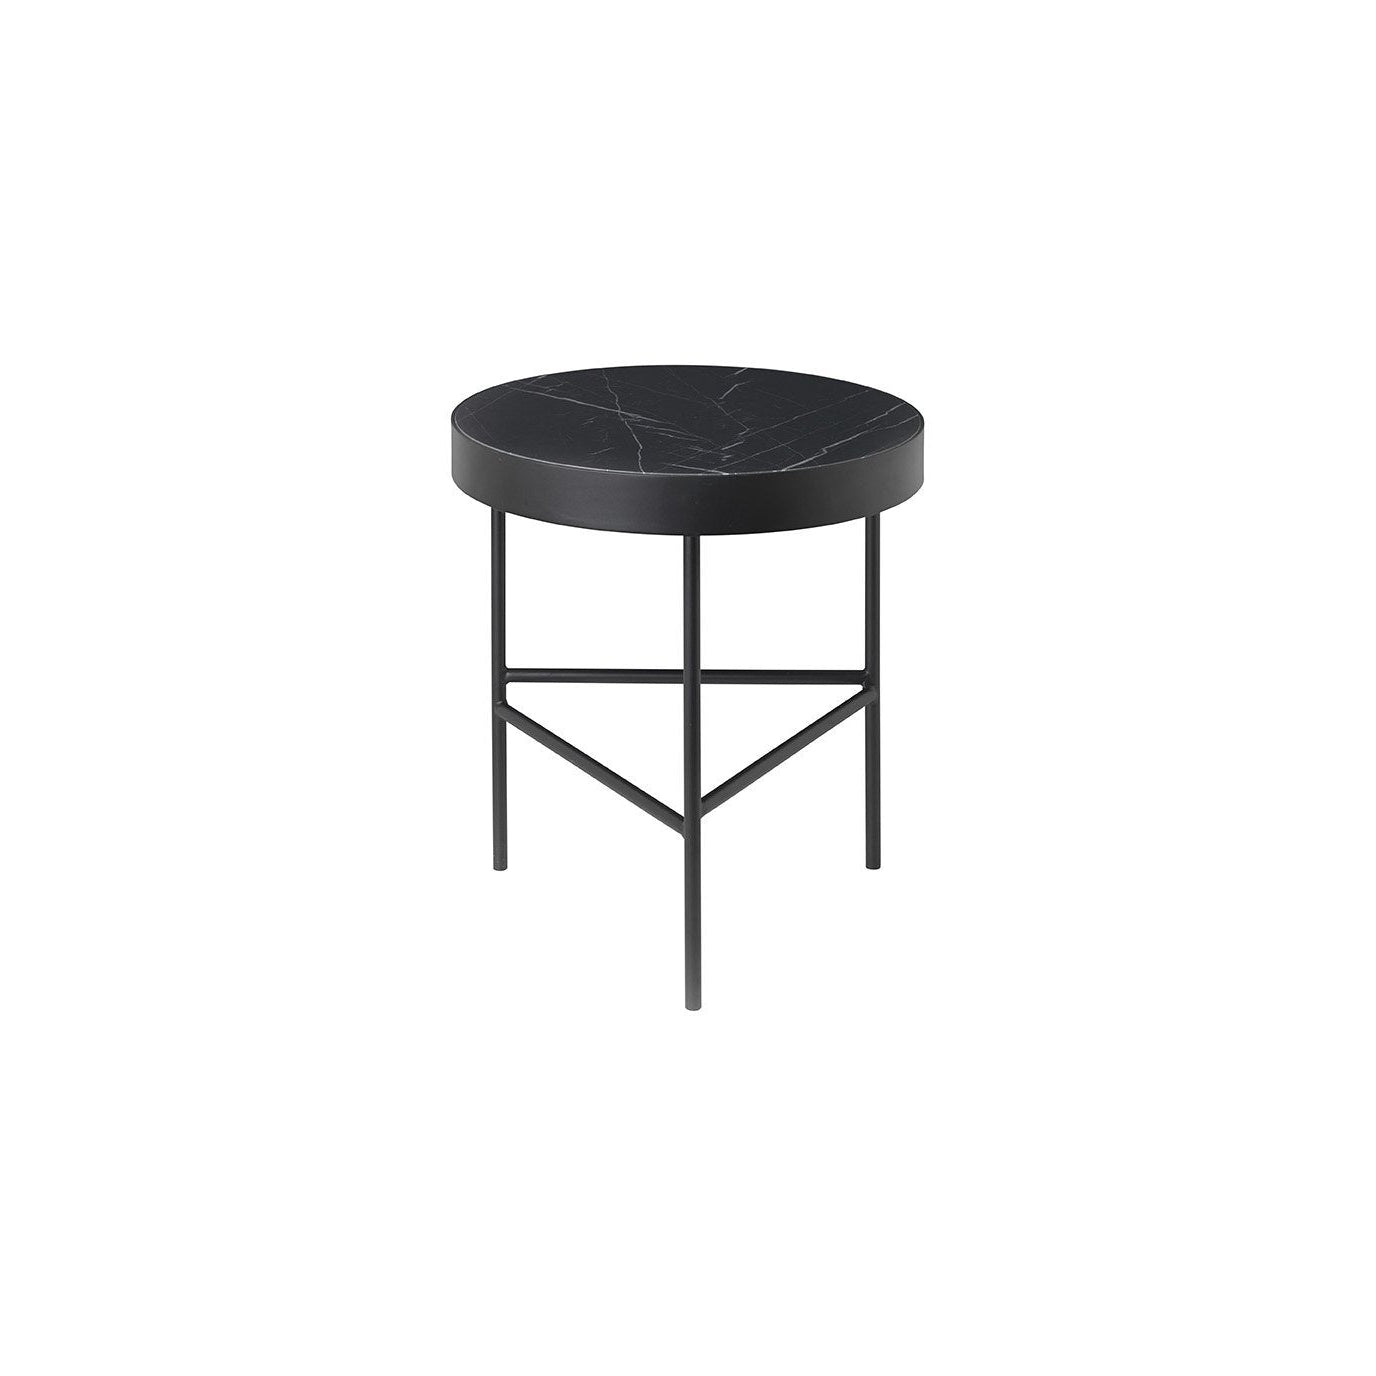 Ferm Living Marble Table Marquina nera, Ø40 cm